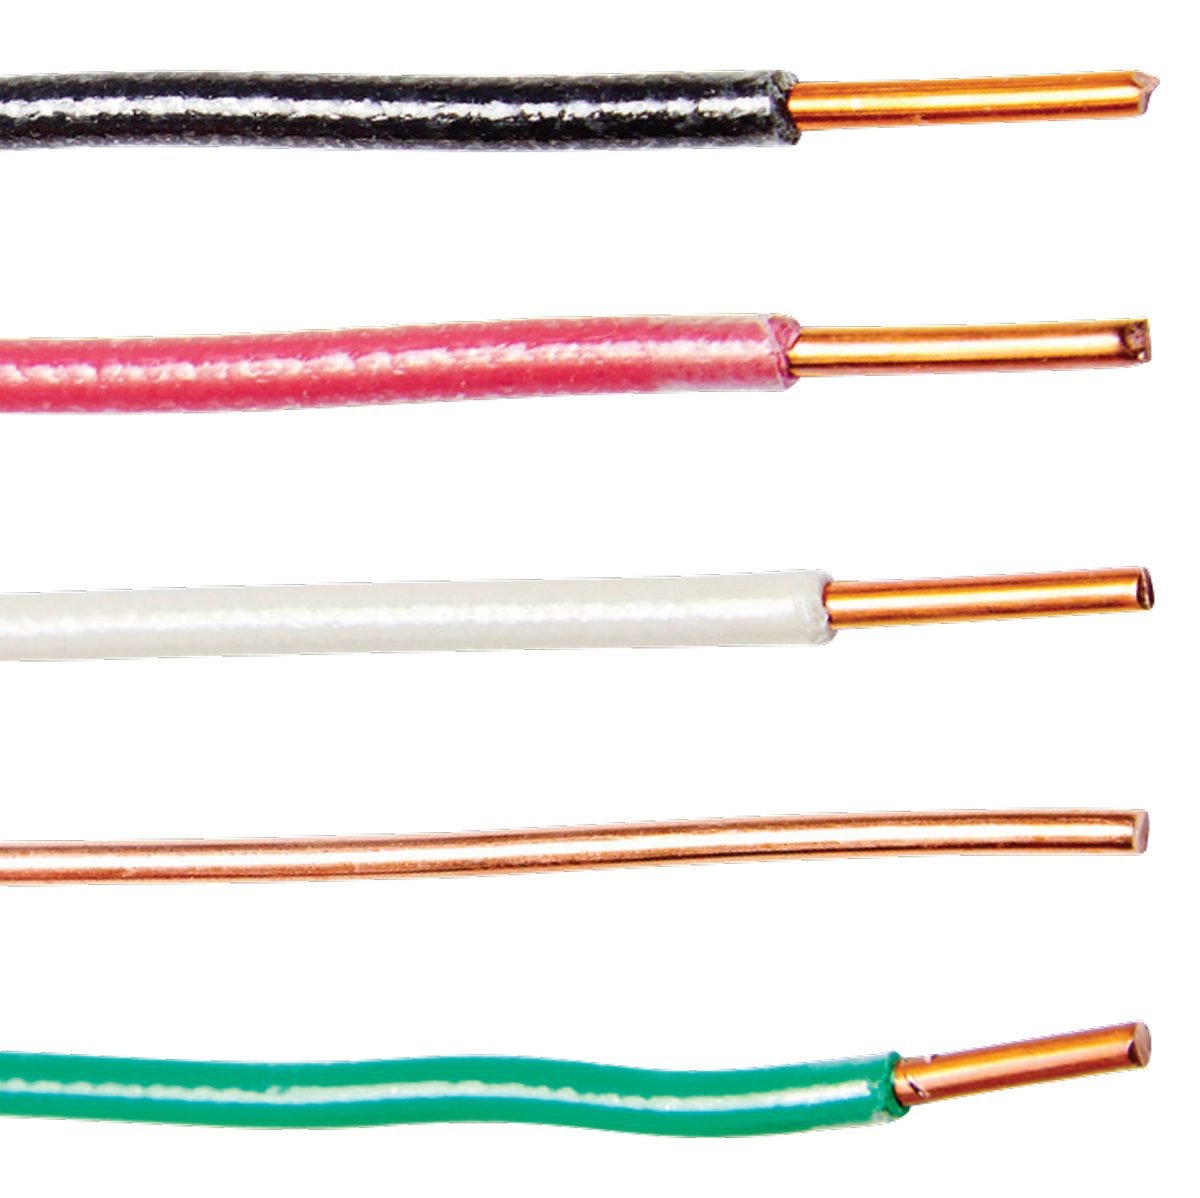 Romex Wire and NM Electrical Cable Buying Guide